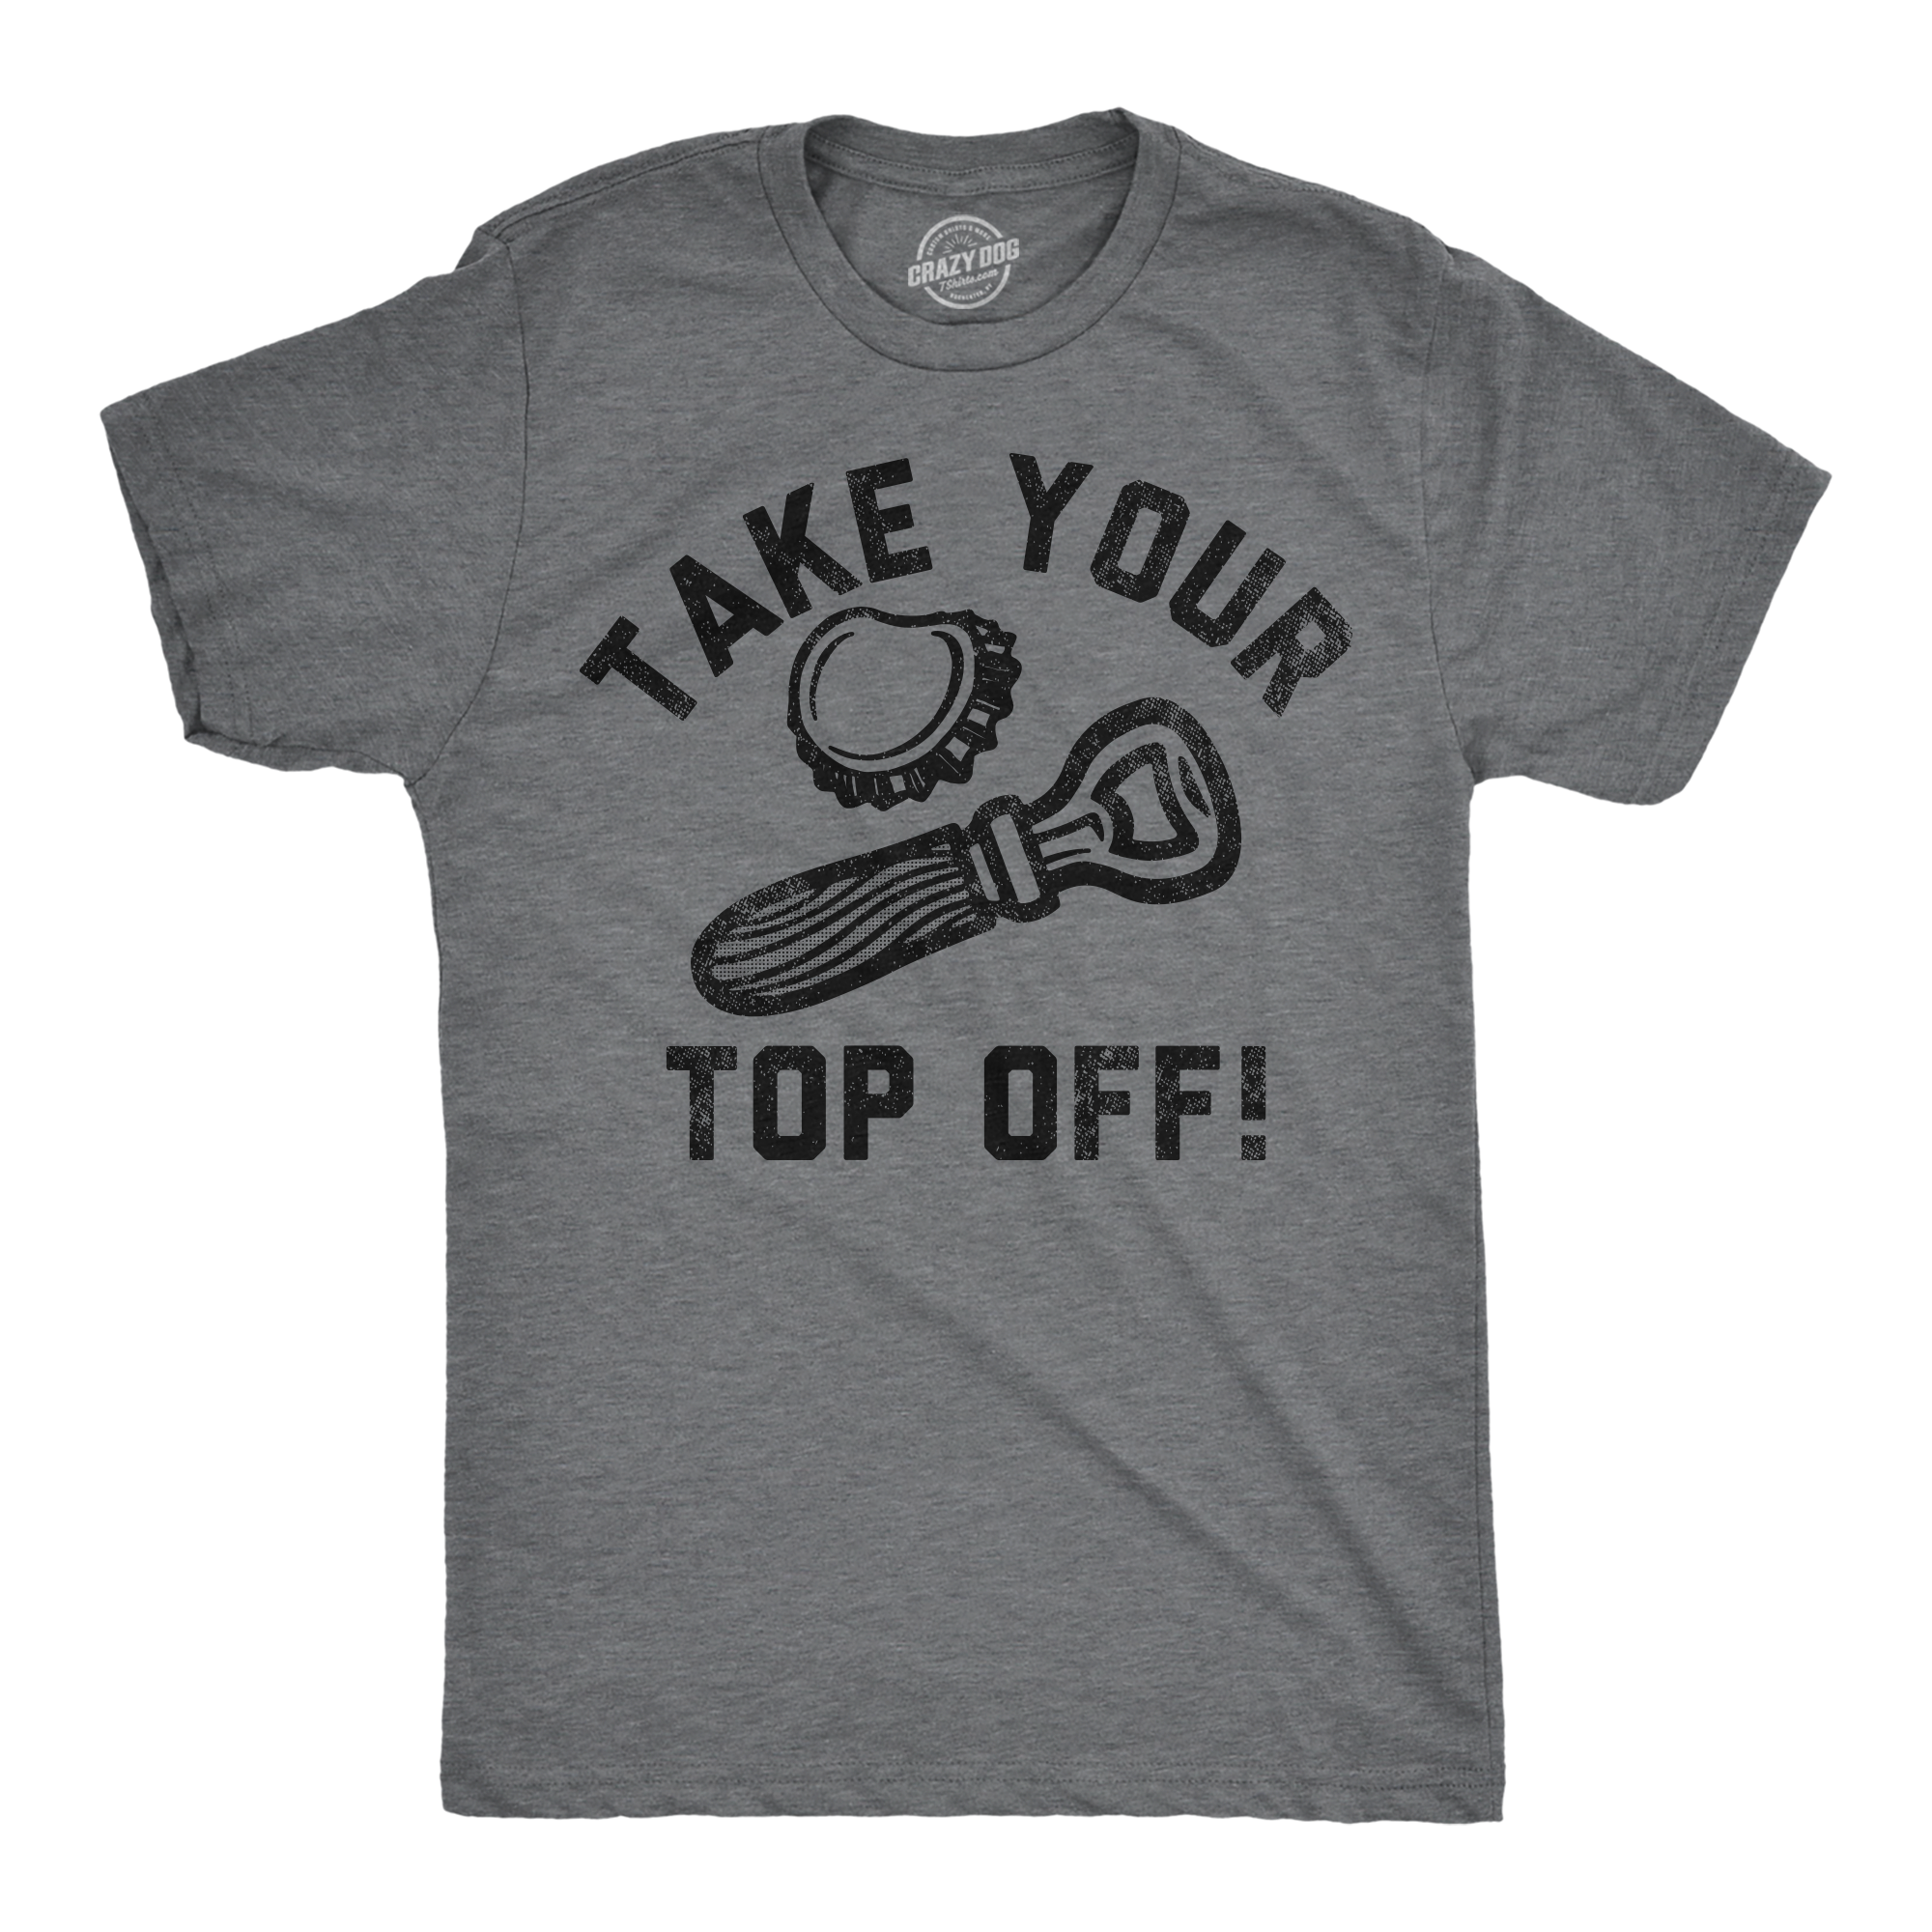 Funny Dark Heather Grey - Take Your Top Off Take Your Top Off Mens T Shirt Nerdy Drinking sarcastic Tee